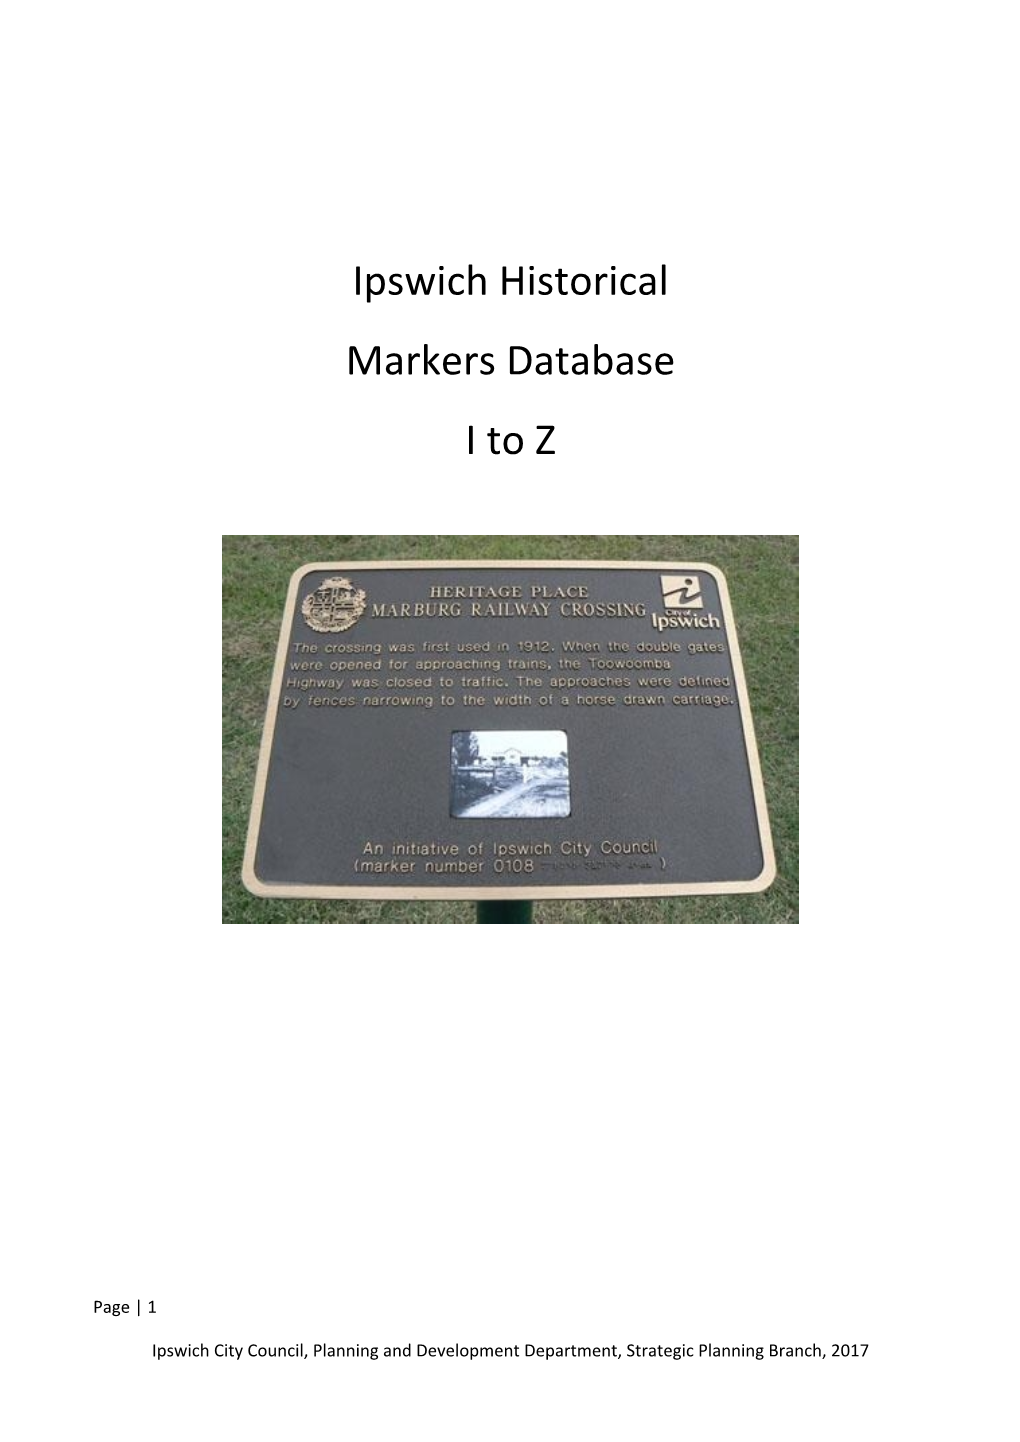 Ipswich Historical Markers Database I to Z